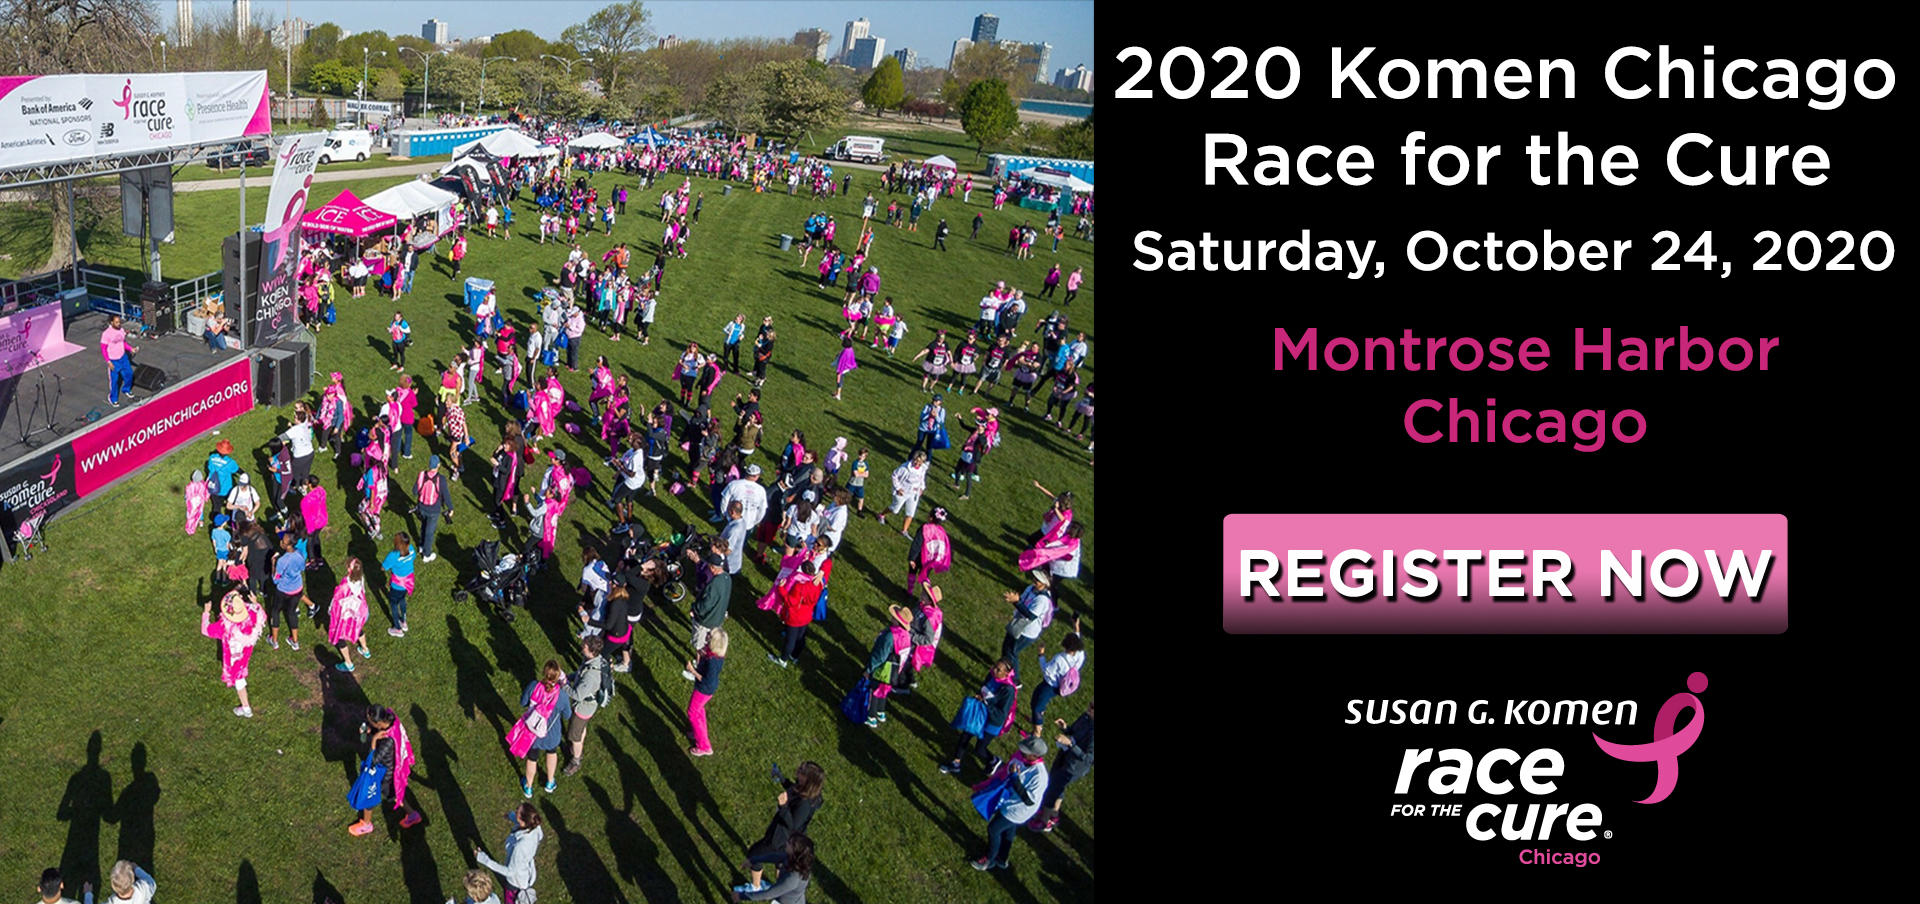 Susan G Komen Chicago Join Our Fight. Save Lives.